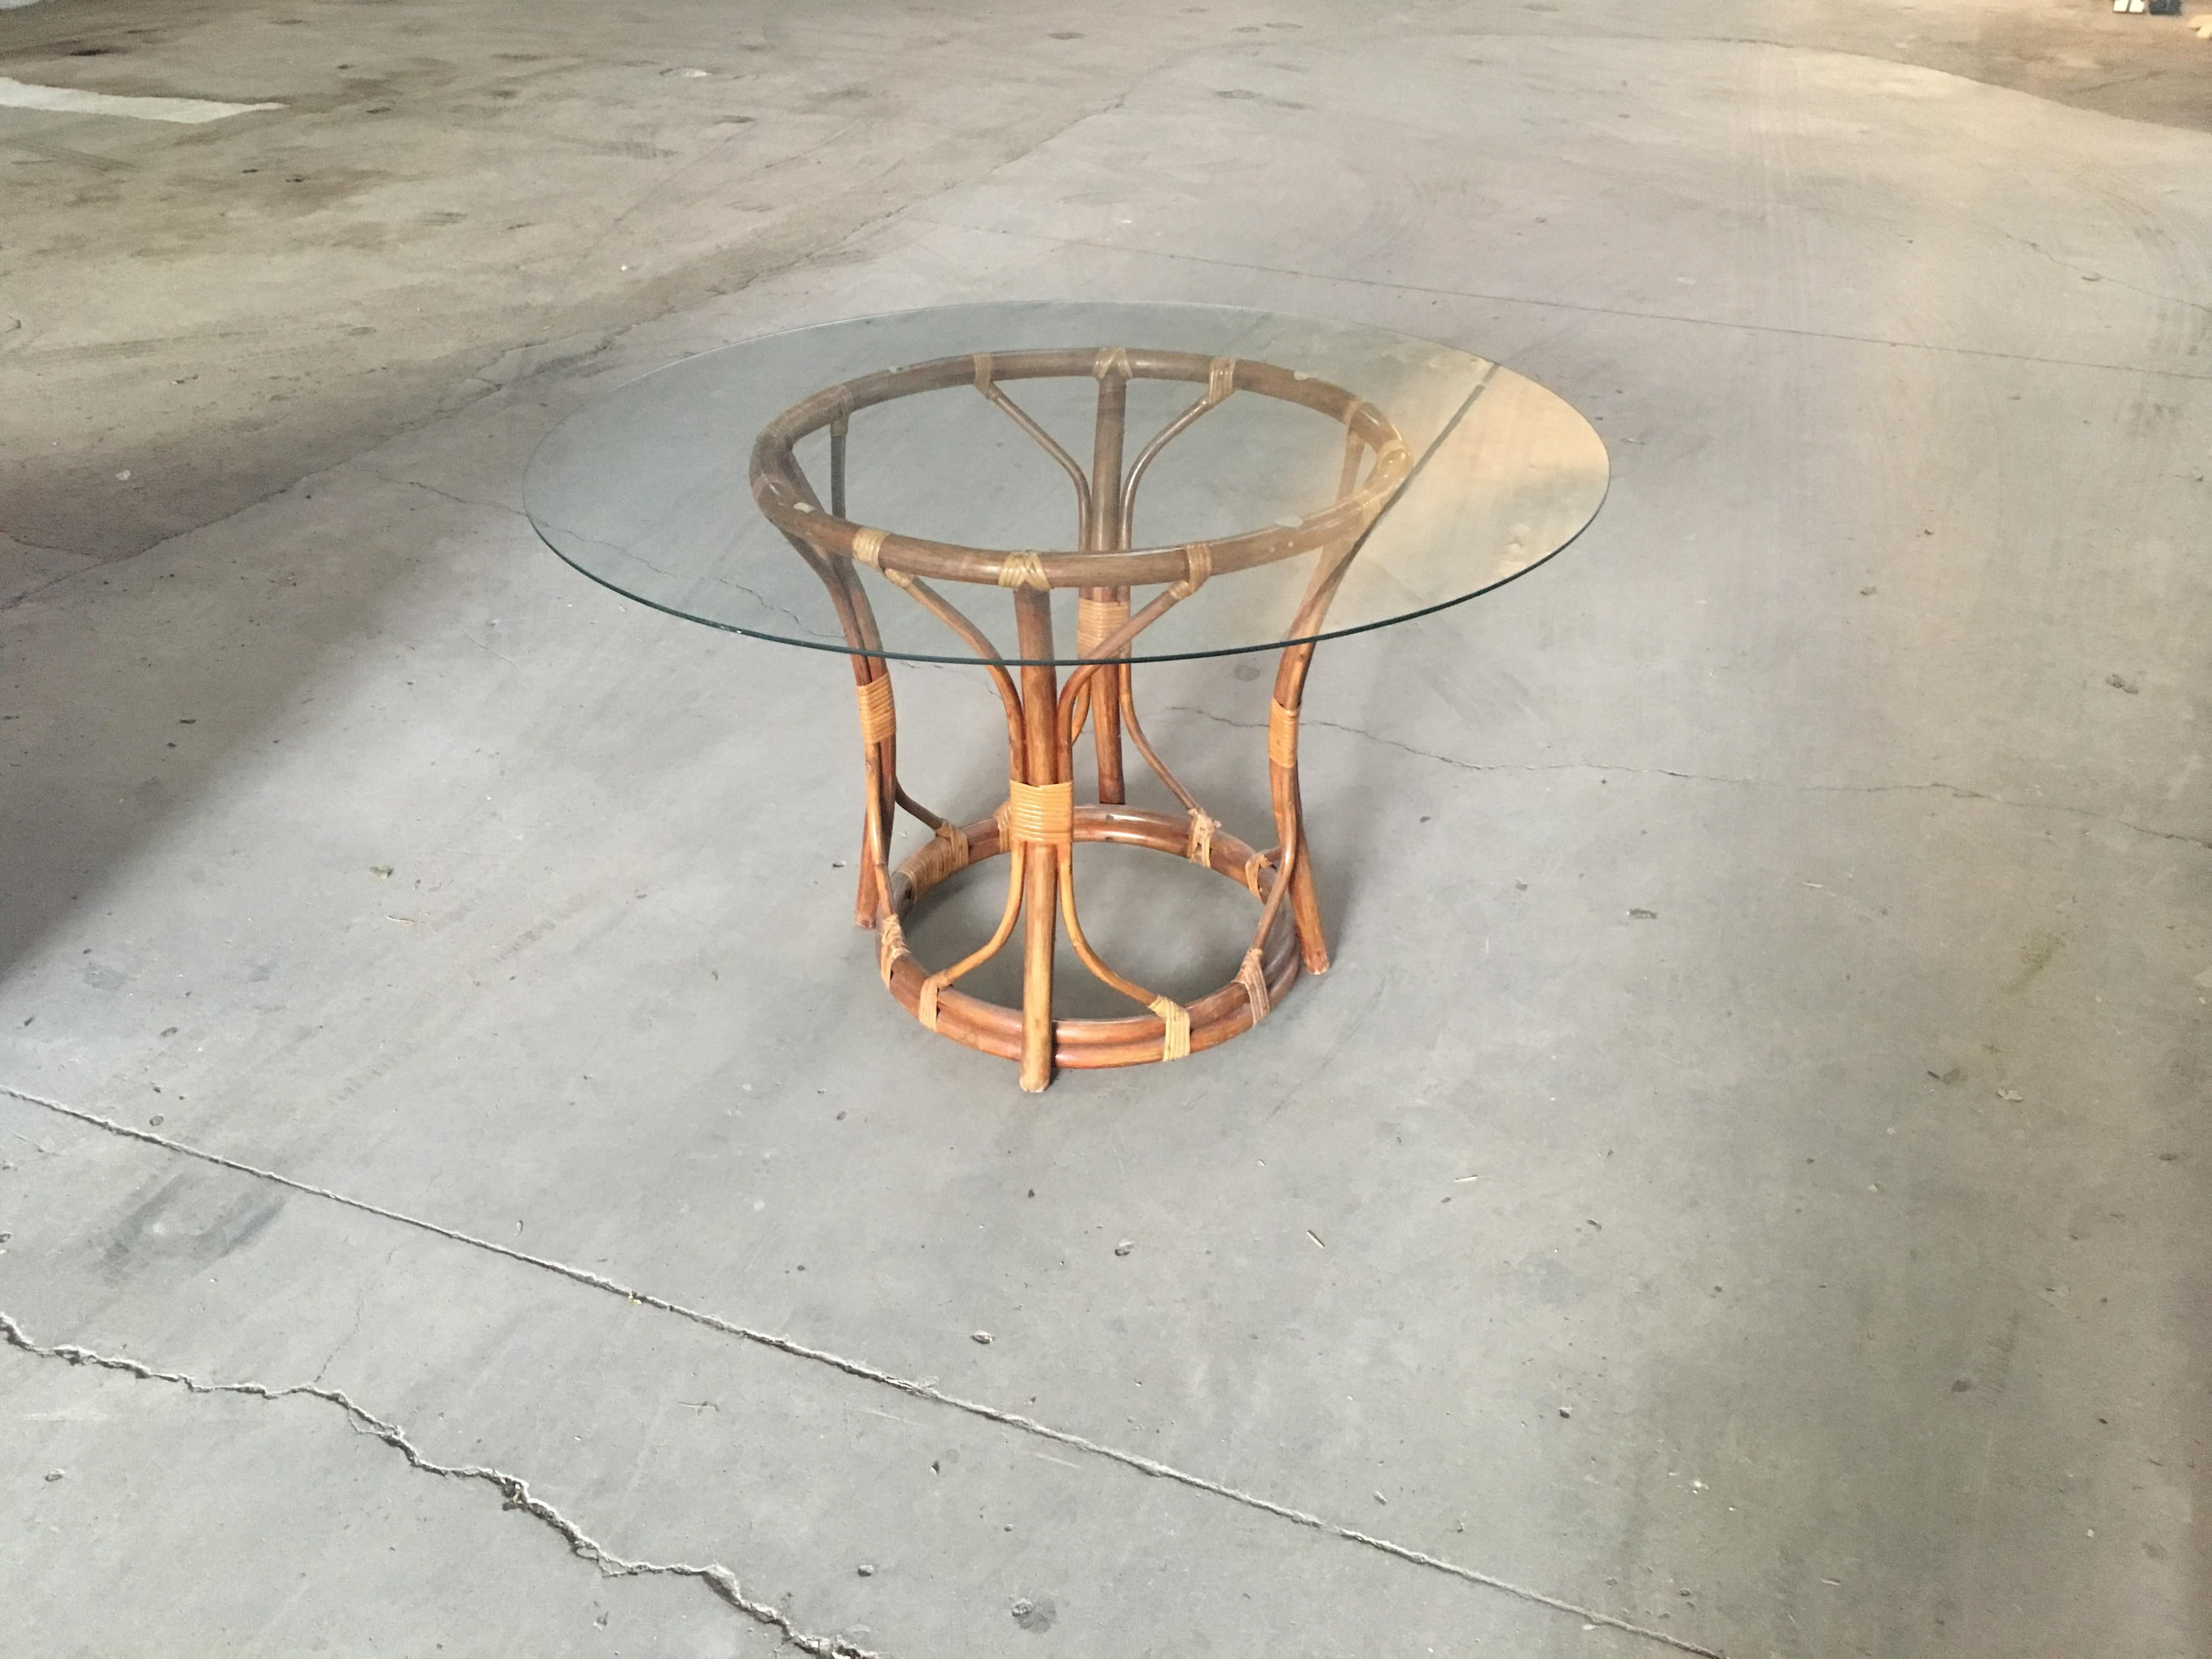 Mid-Century Modern Italian bamboo an d cane round table with glass top, 1970s.